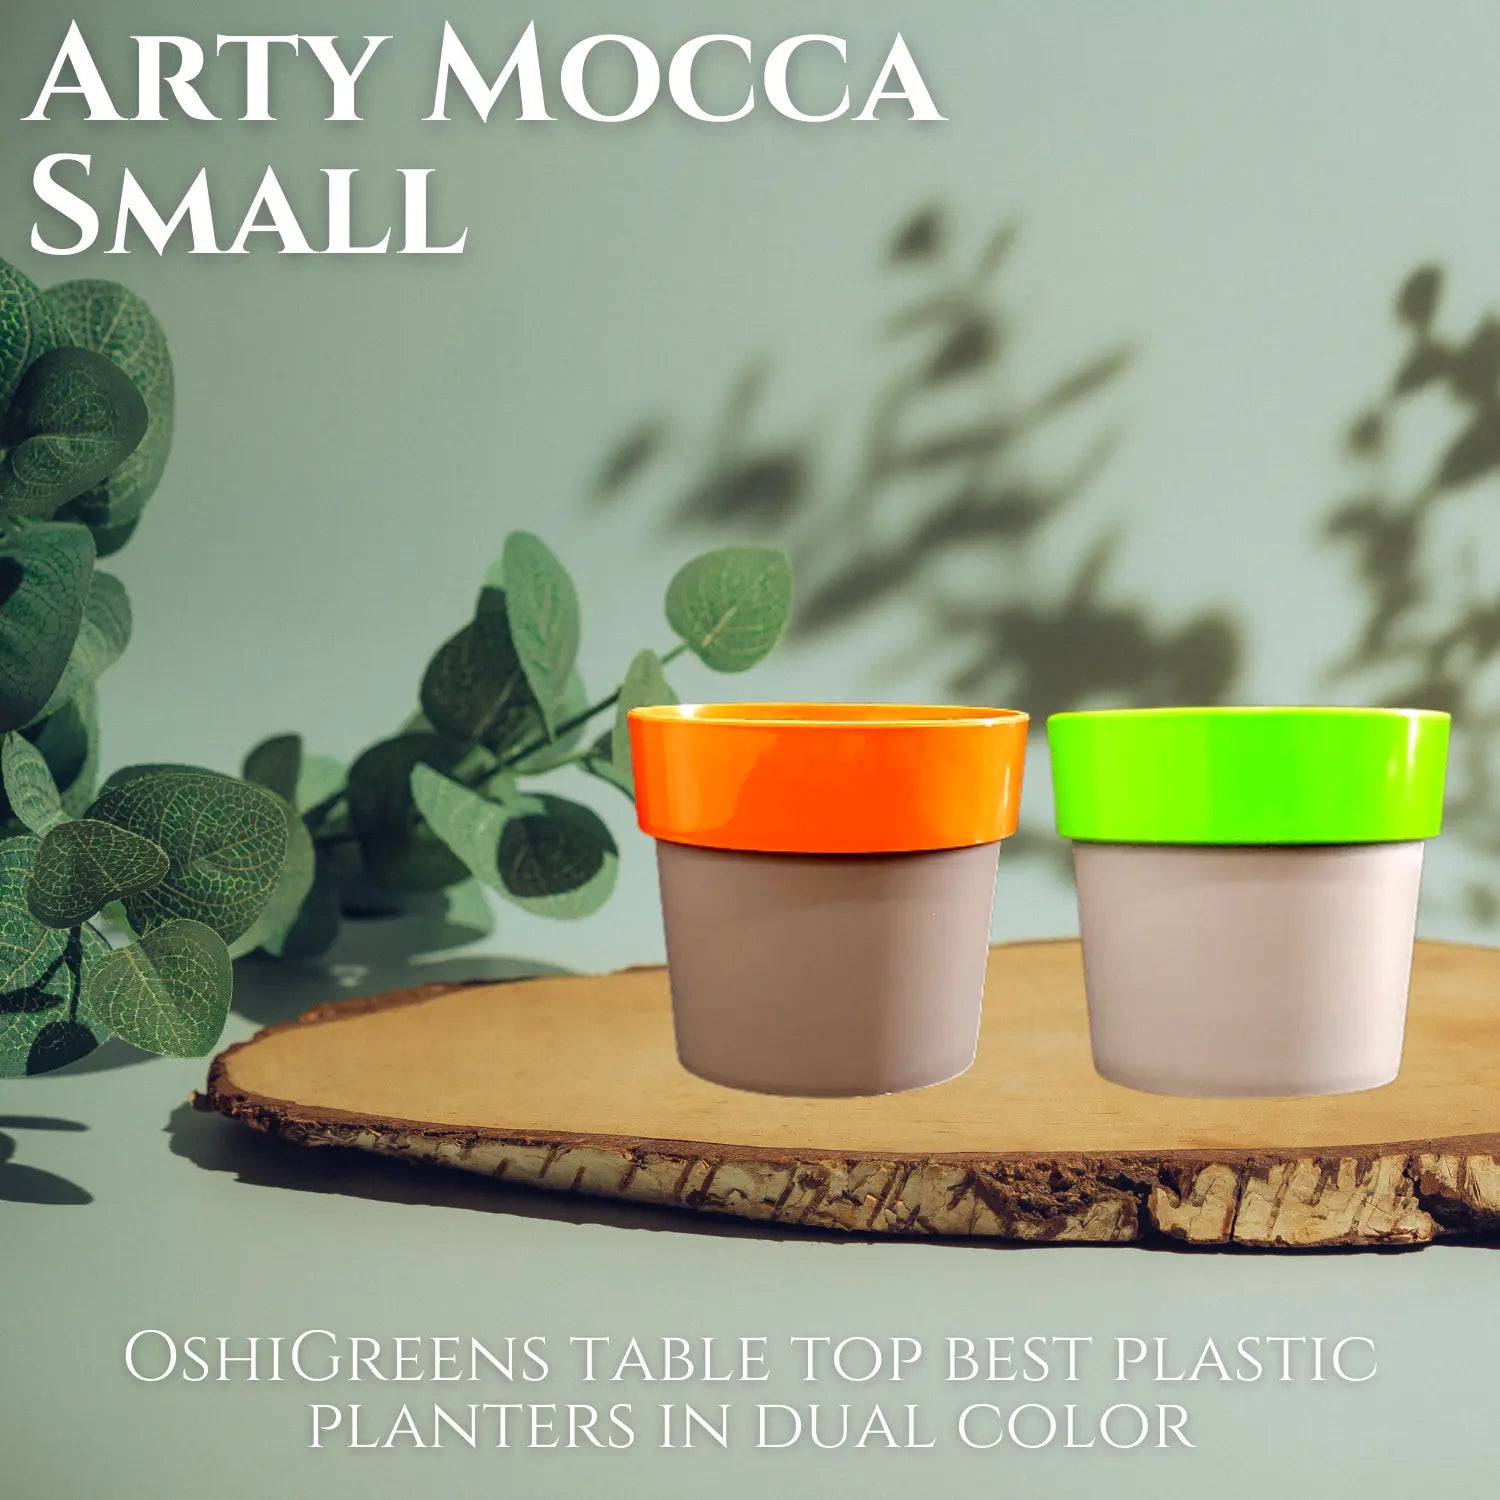 Arty Mocca Small